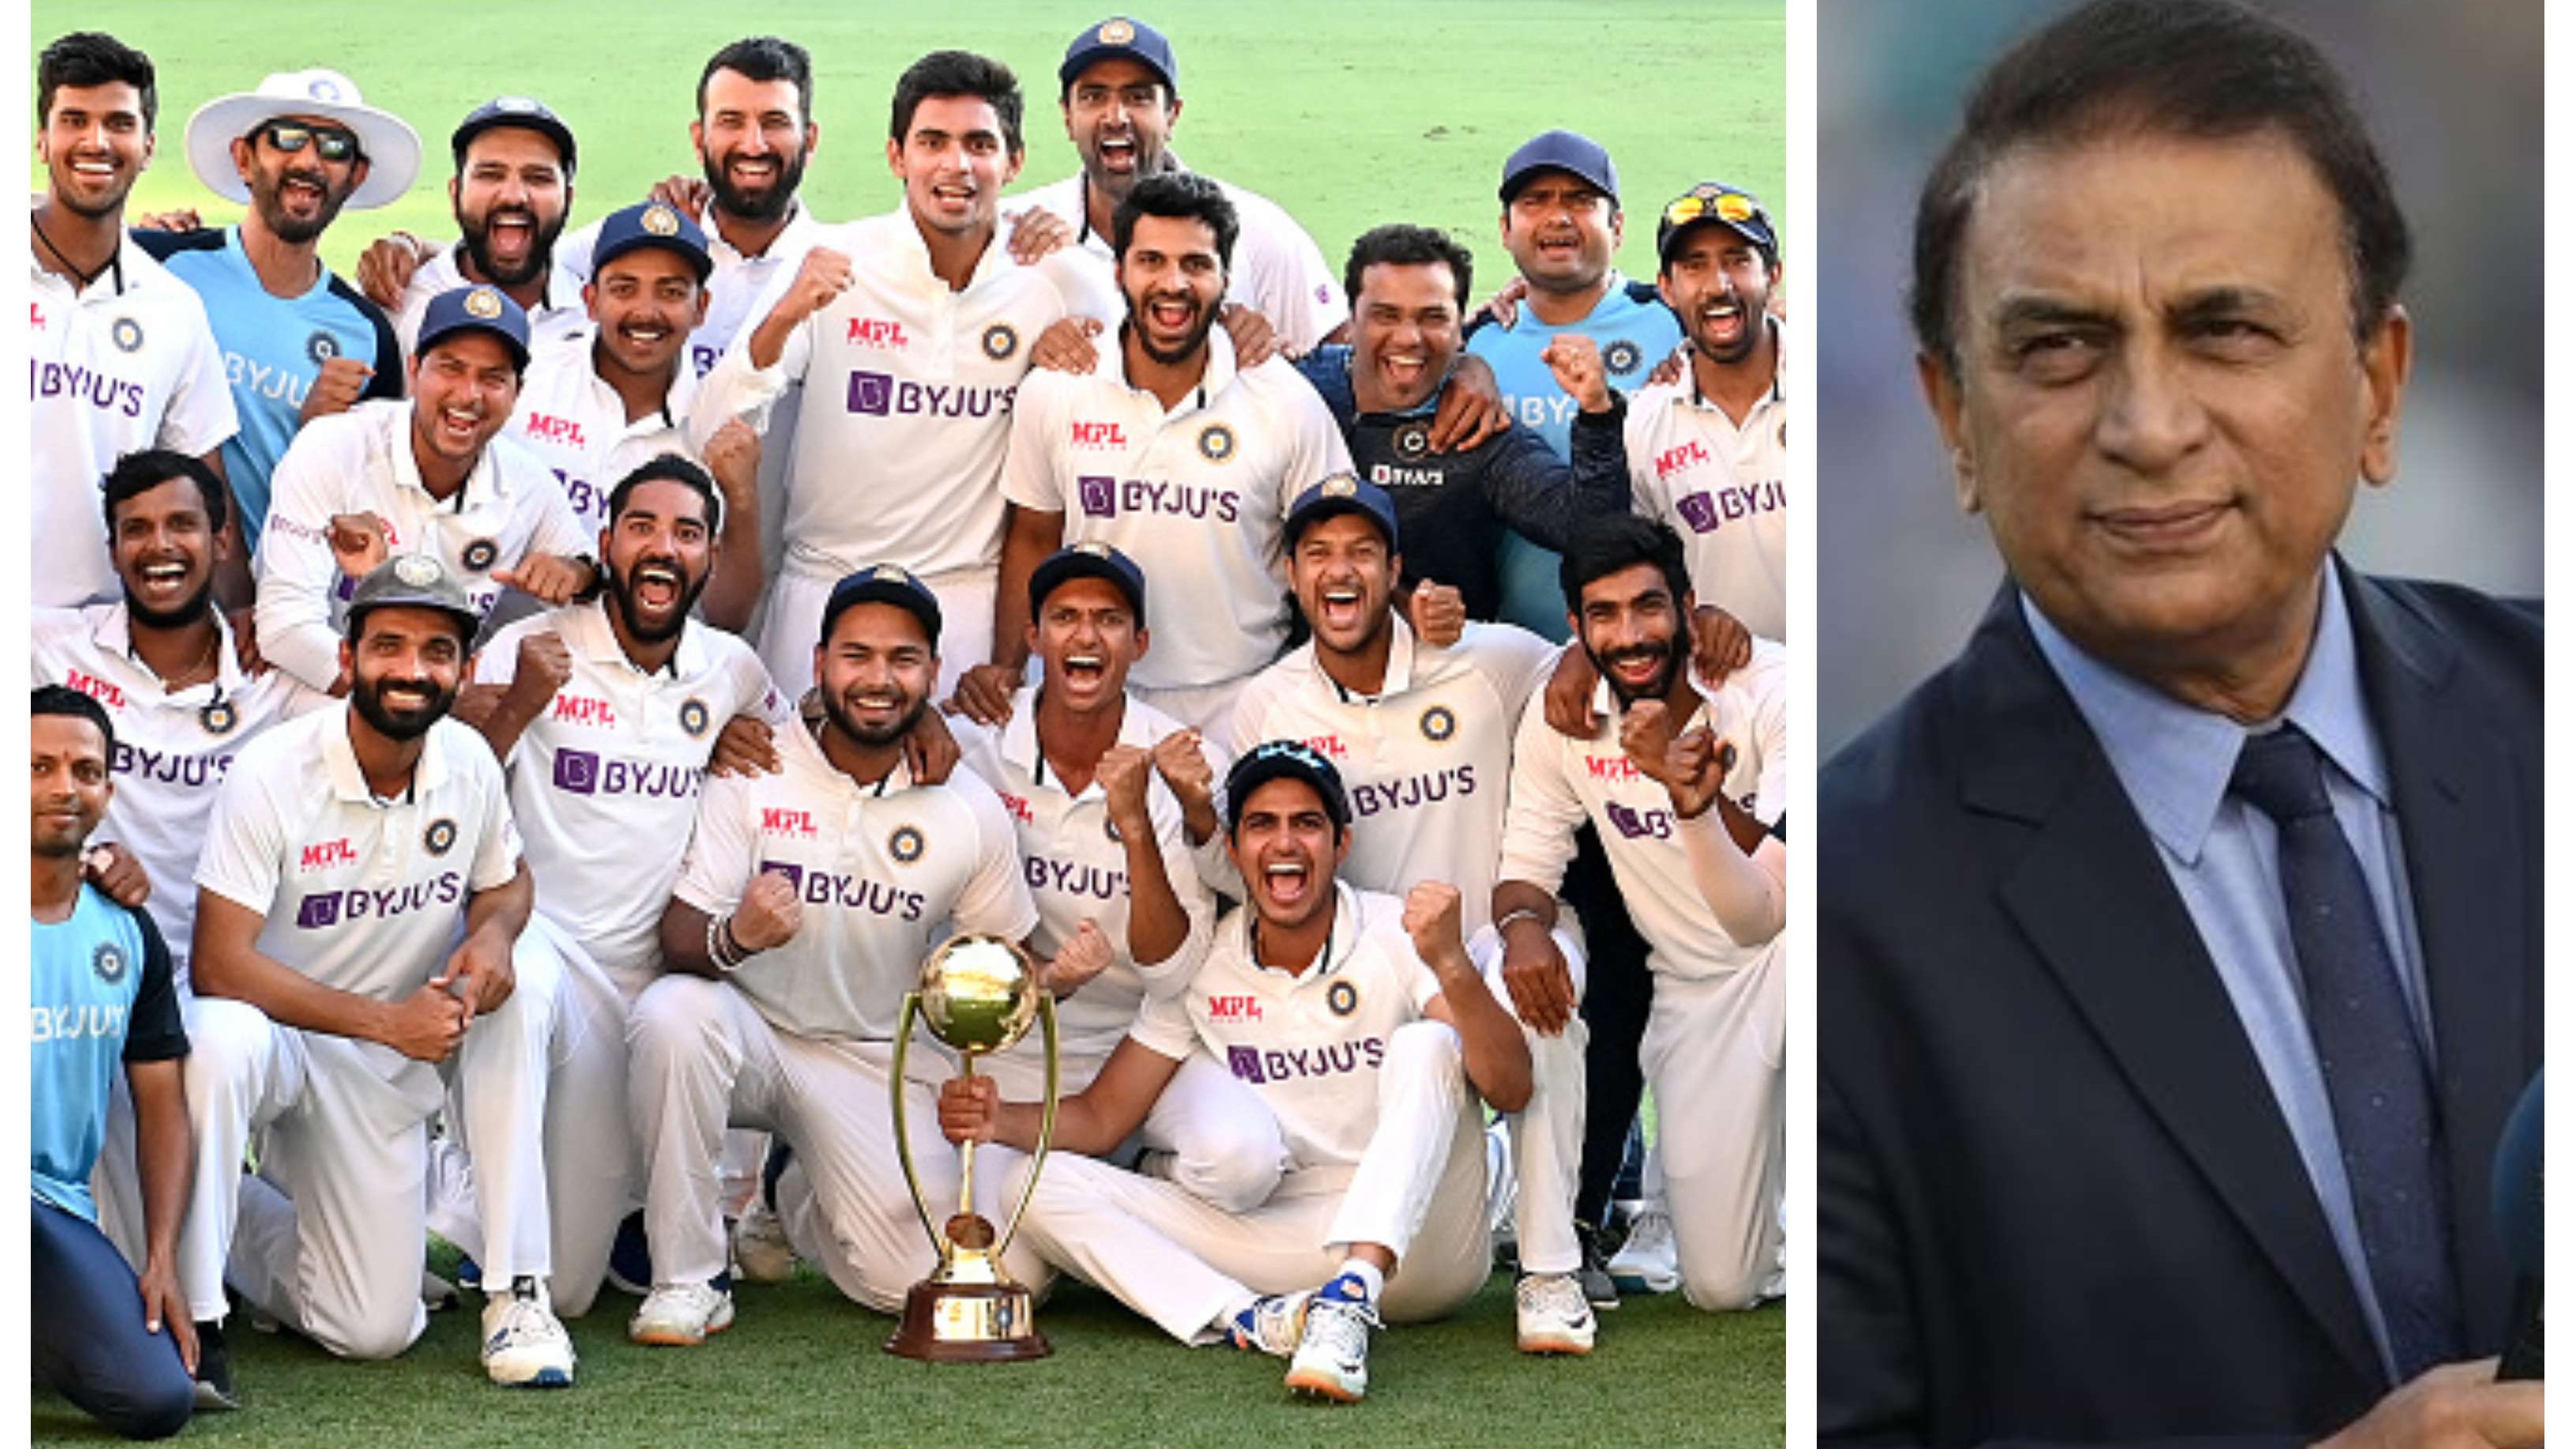 AUS v IND 2020-21: ‘This is a magical moment for Indian cricket’, says Gavaskar after series win over Australia